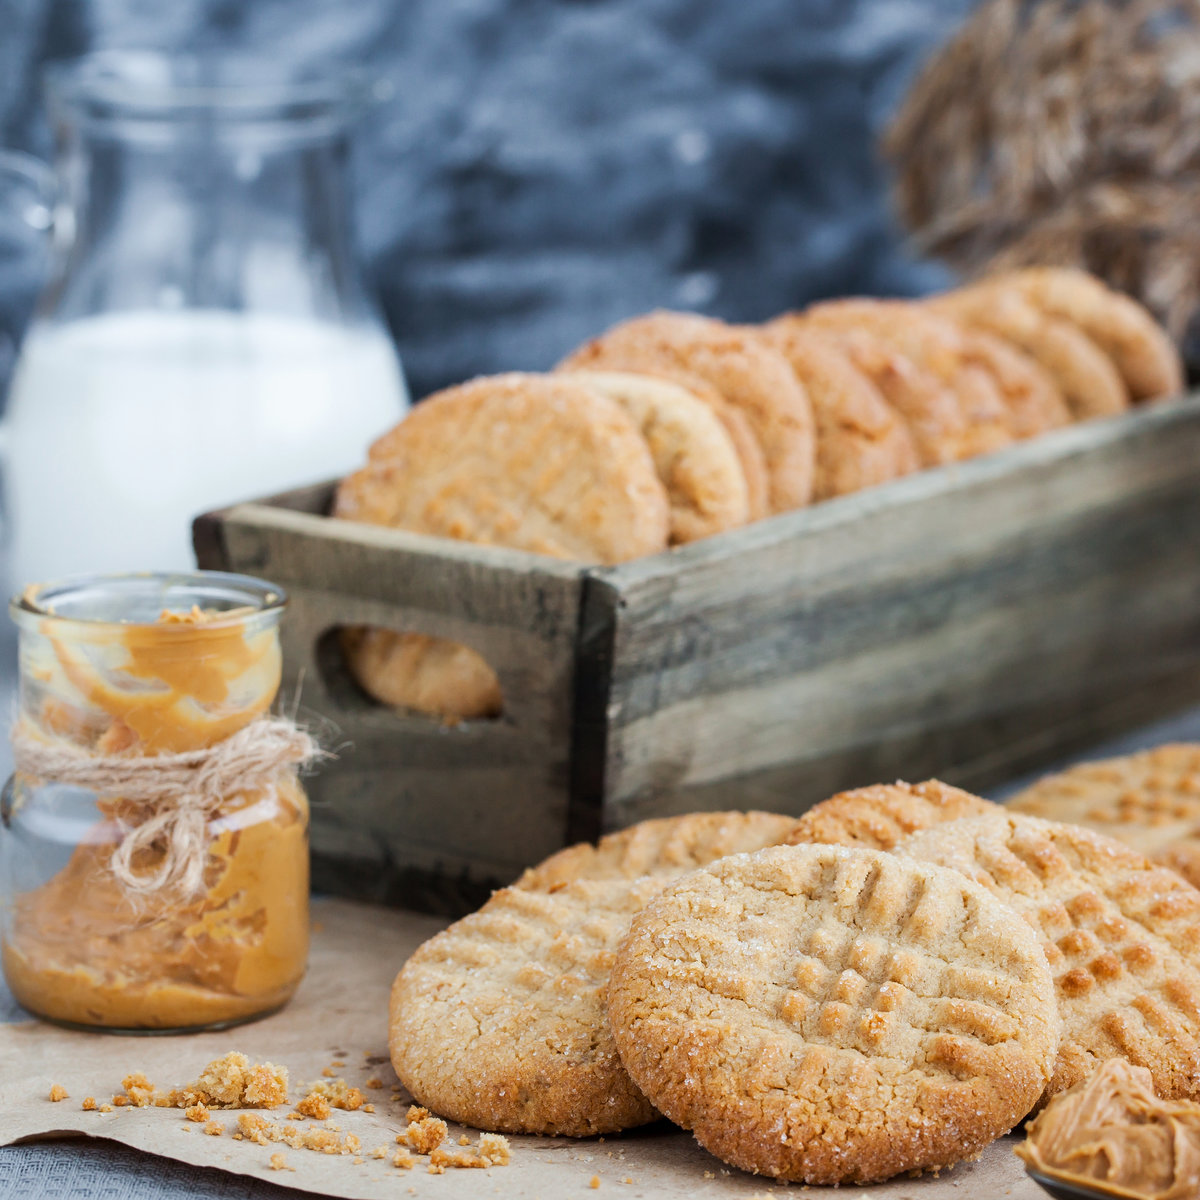 Stack of biscuits on brown paper, in front of a box of biscuits and glass of milk 